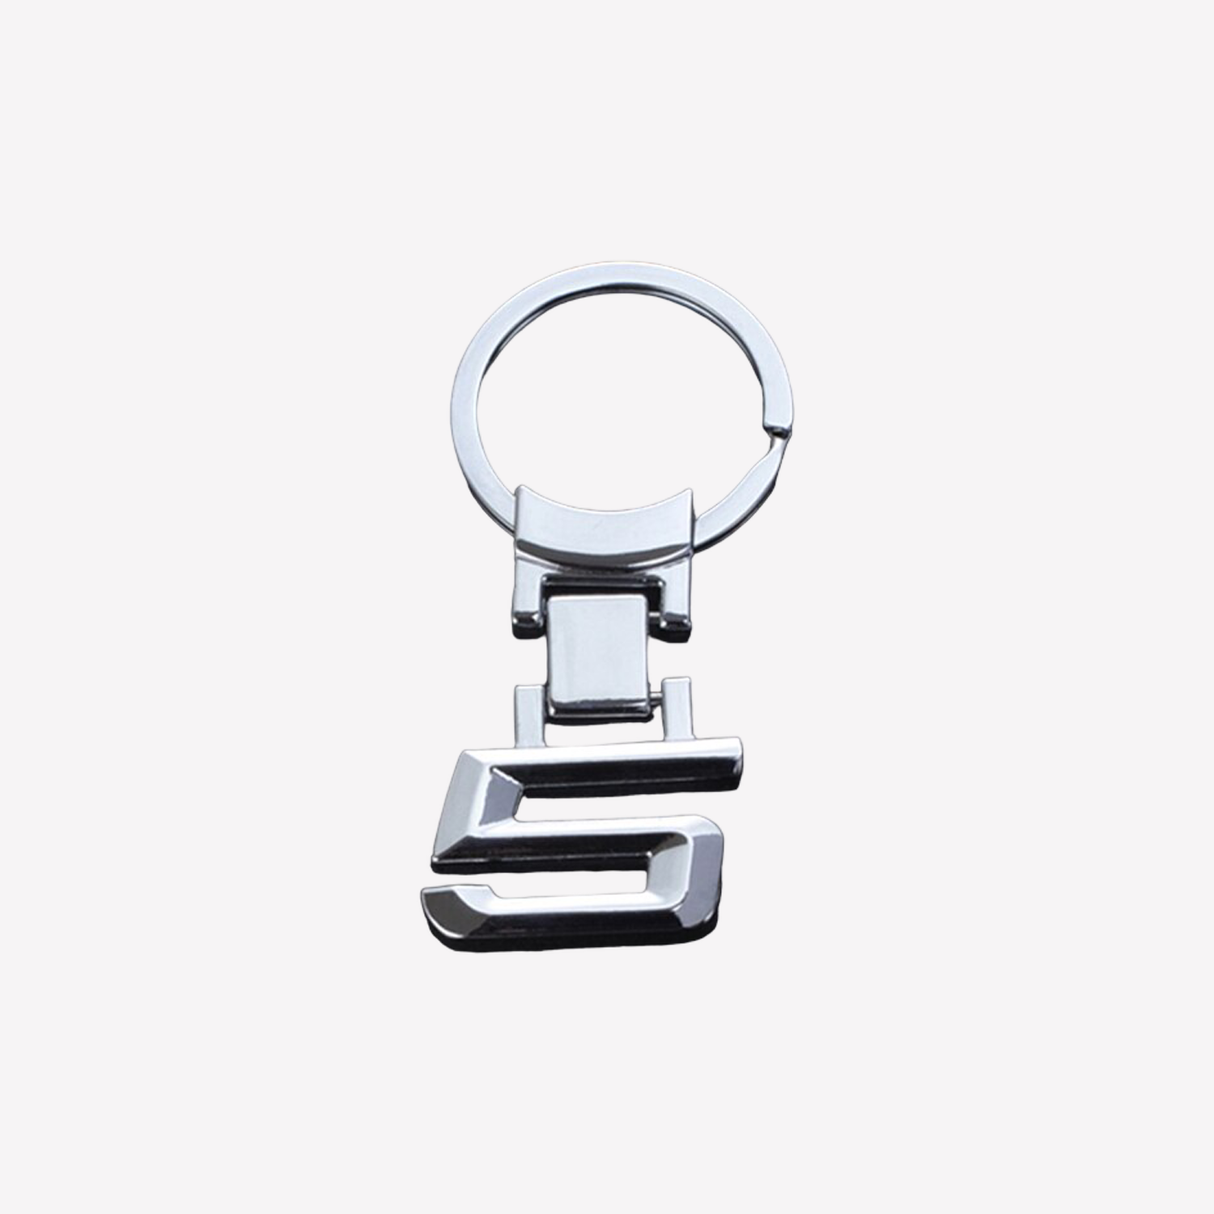 BMW Style Chassis Code Keychains 1 3 5 6 7 8 X series High Quality